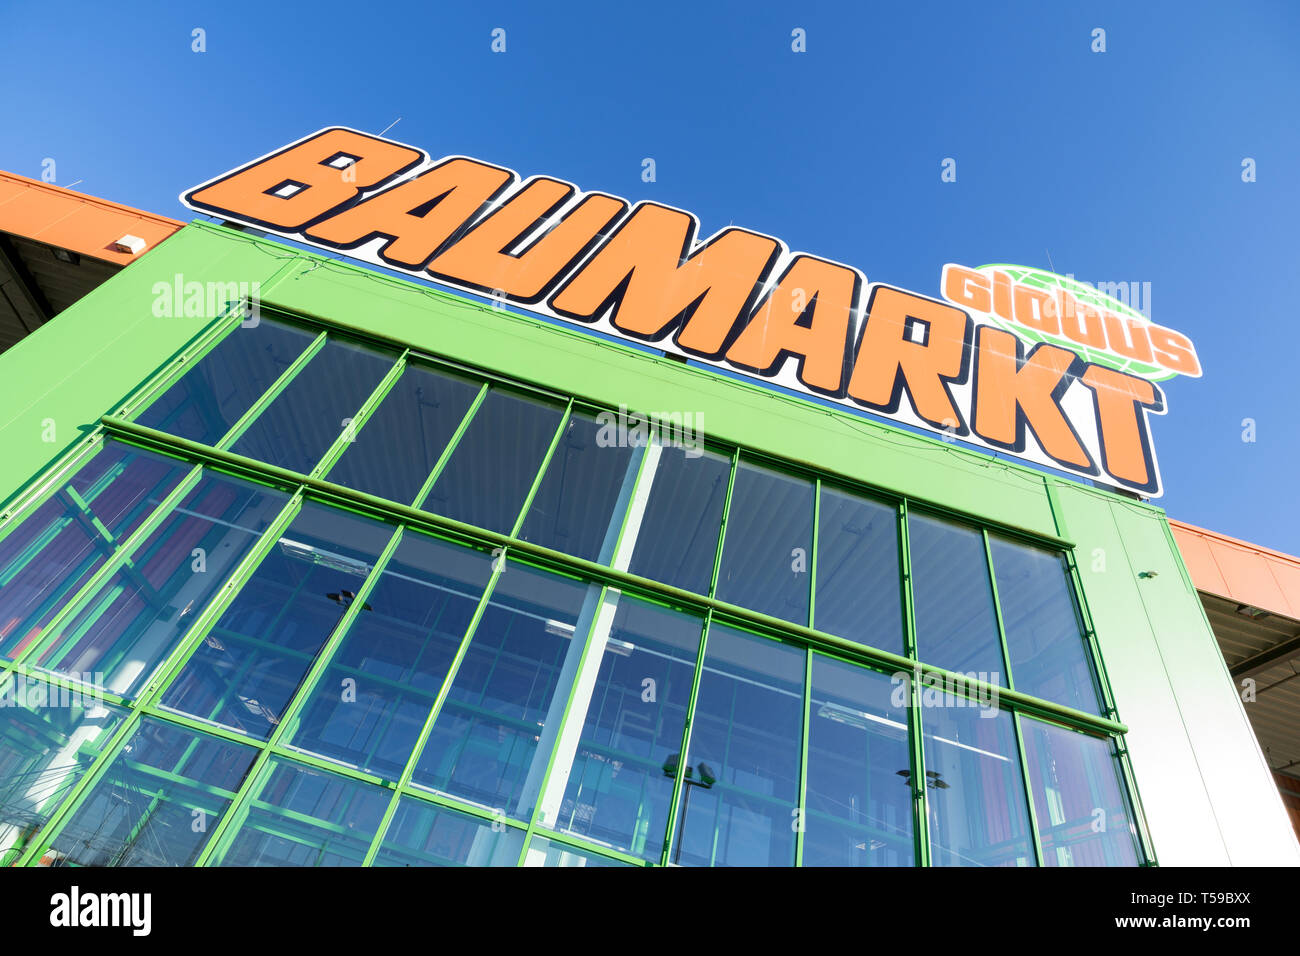 Globus Baumarkt sign at store. Globus is a German retail chain of  hypermarkets, DIY stores and electronics stores Stock Photo - Alamy